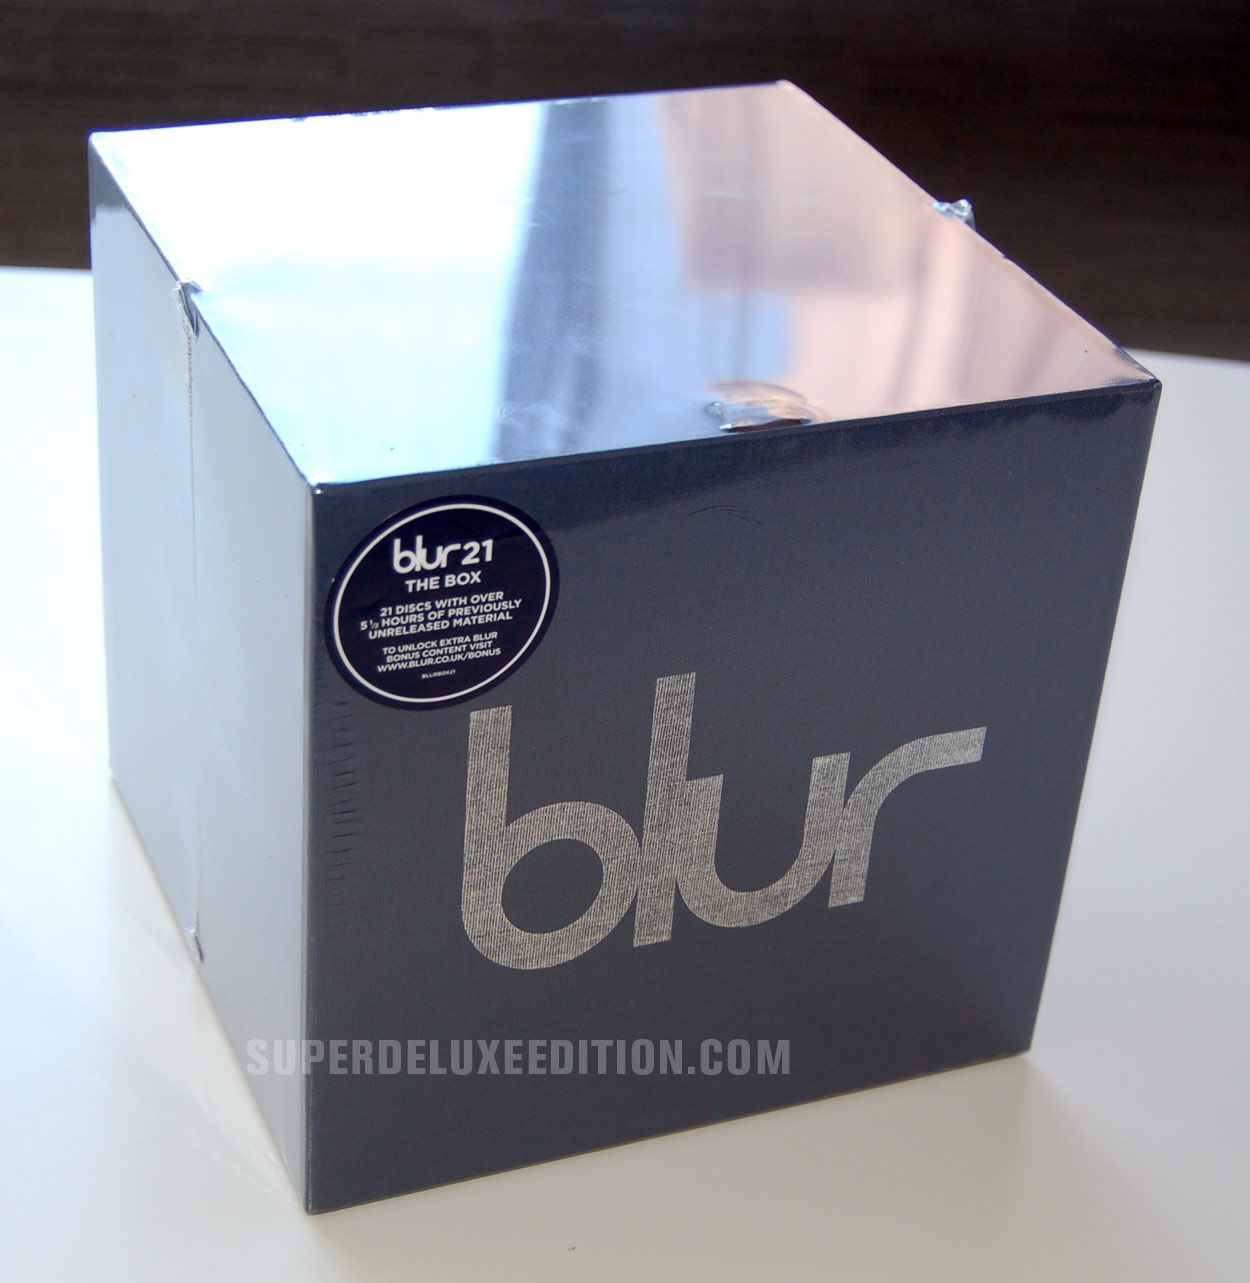 Blur 21: The Box / First pictures